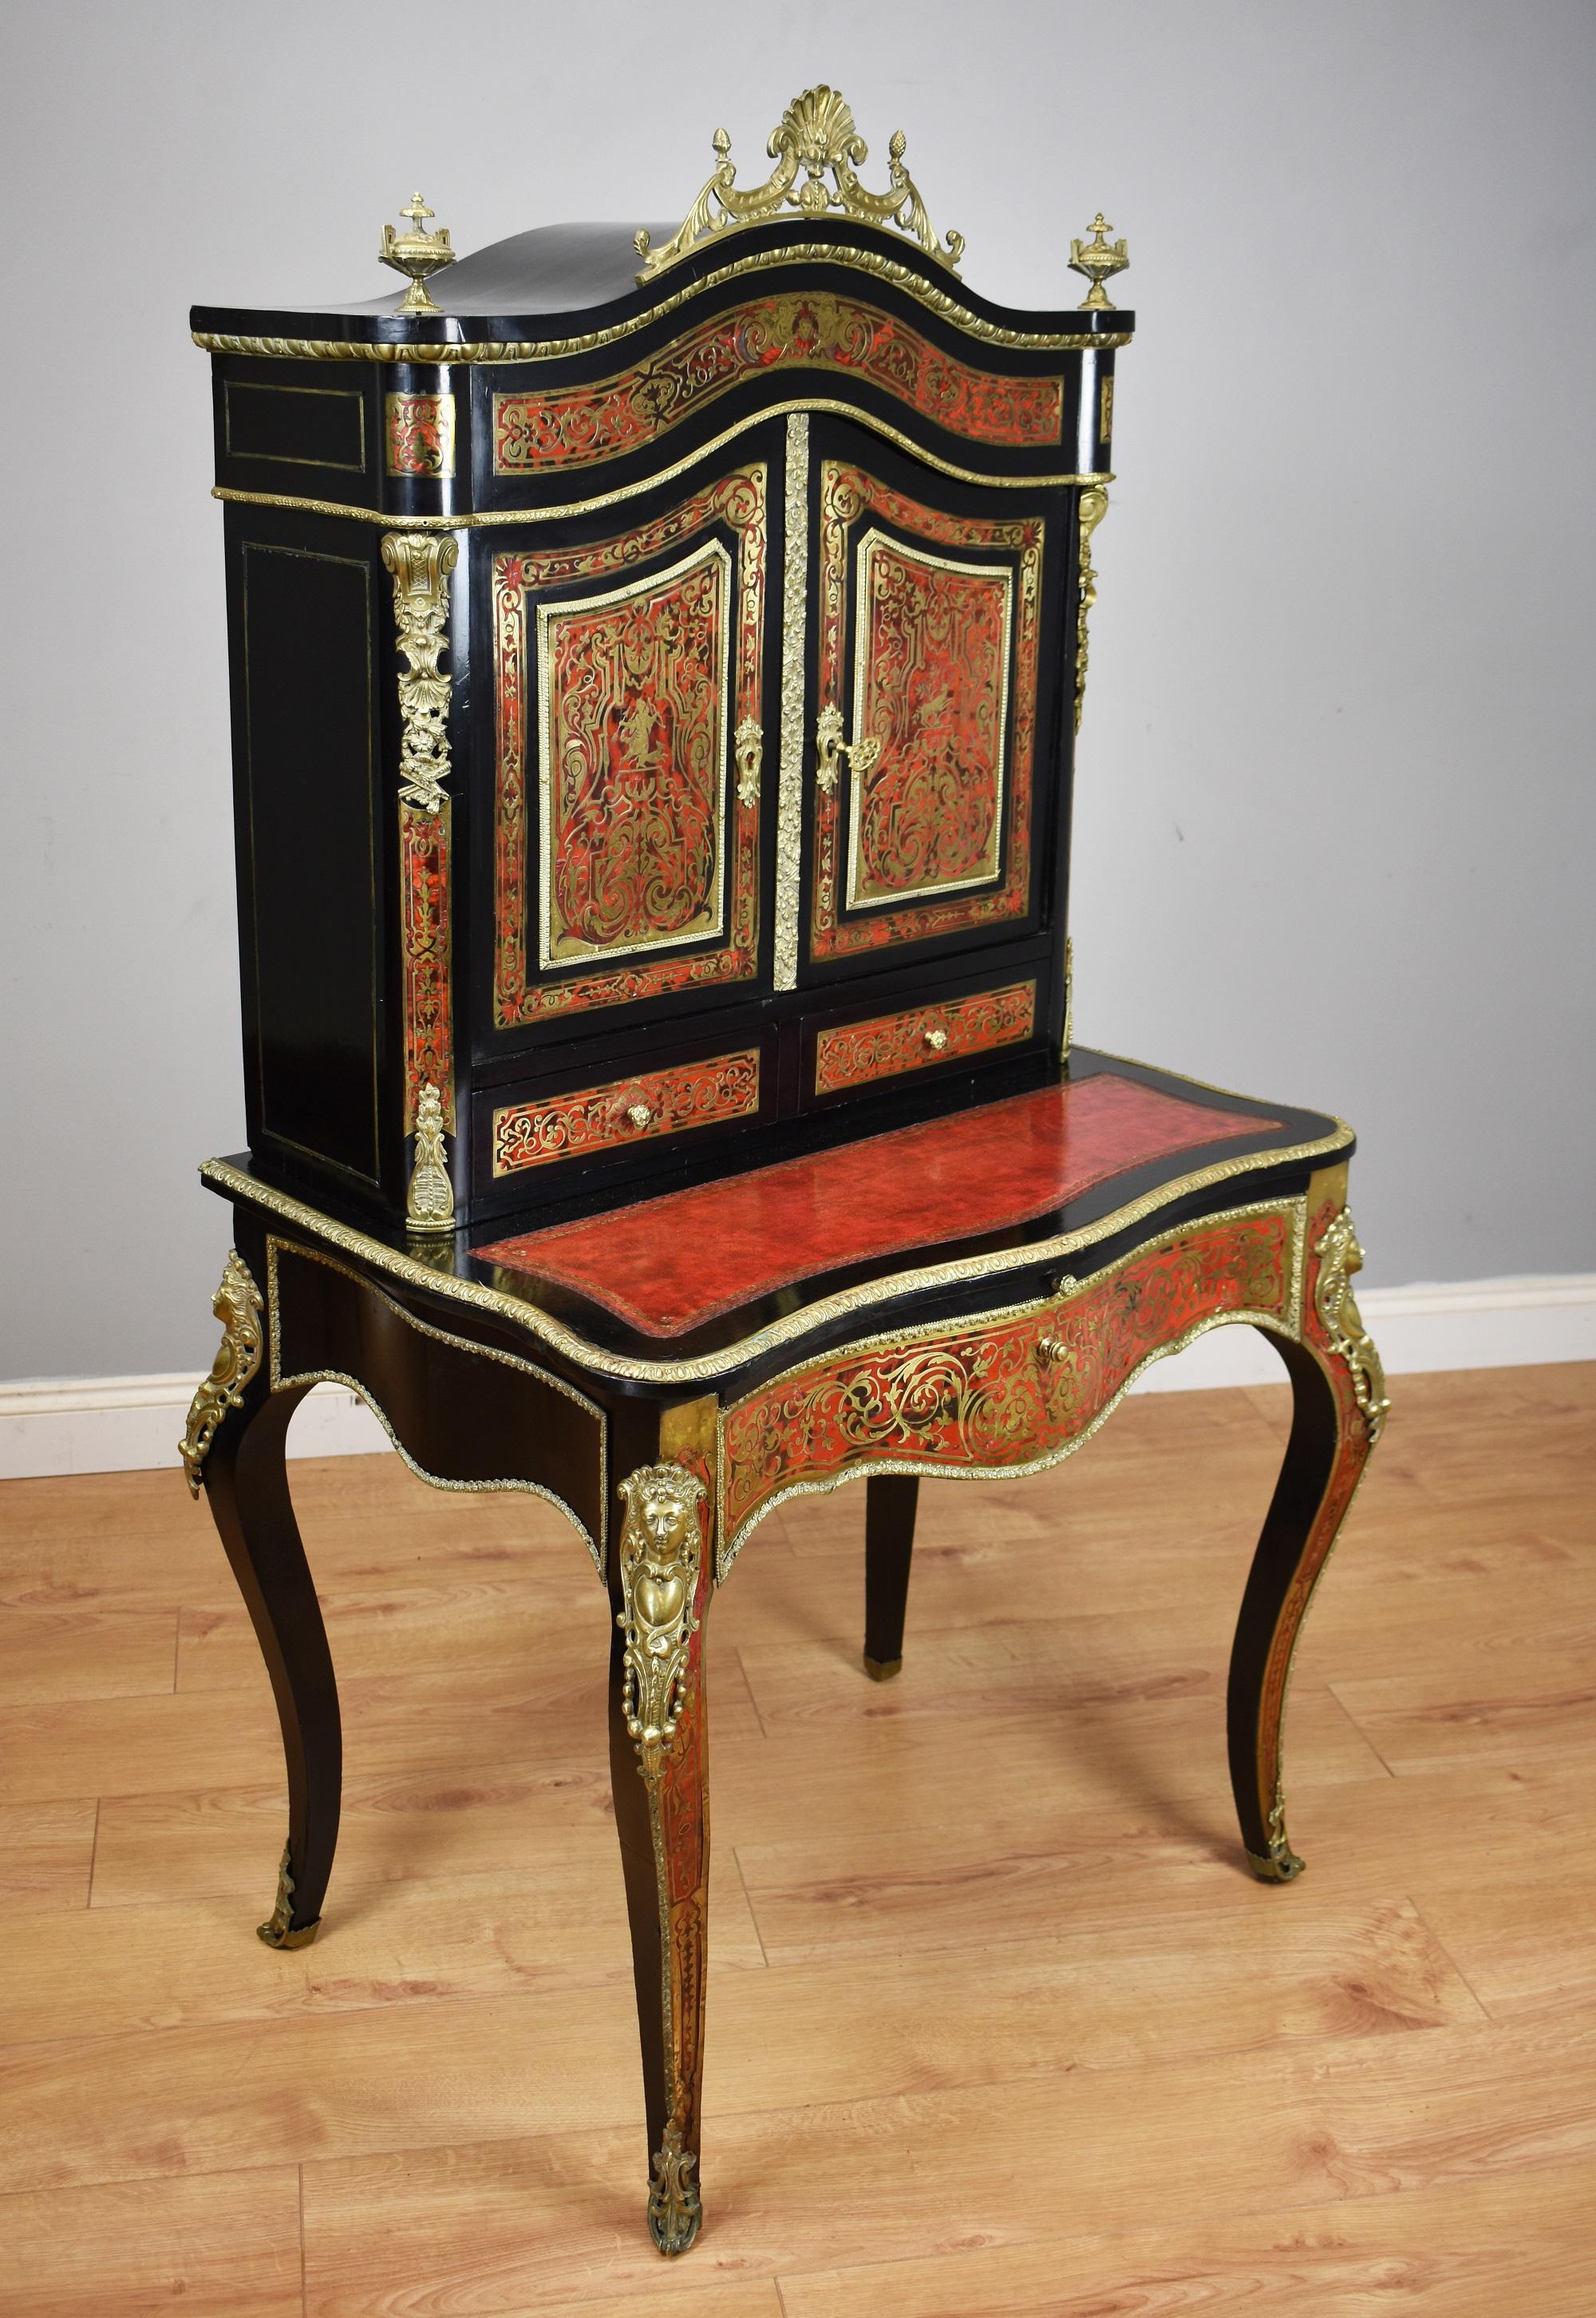 For sale is a fine quality 19th century ebonised Boulle Bonheur Du Jour writing table. The top, of arched form, has an ornate brass pediment, flanked by a brass urn shaped finial on either side. Below this the two doors, each profusely inlaid with